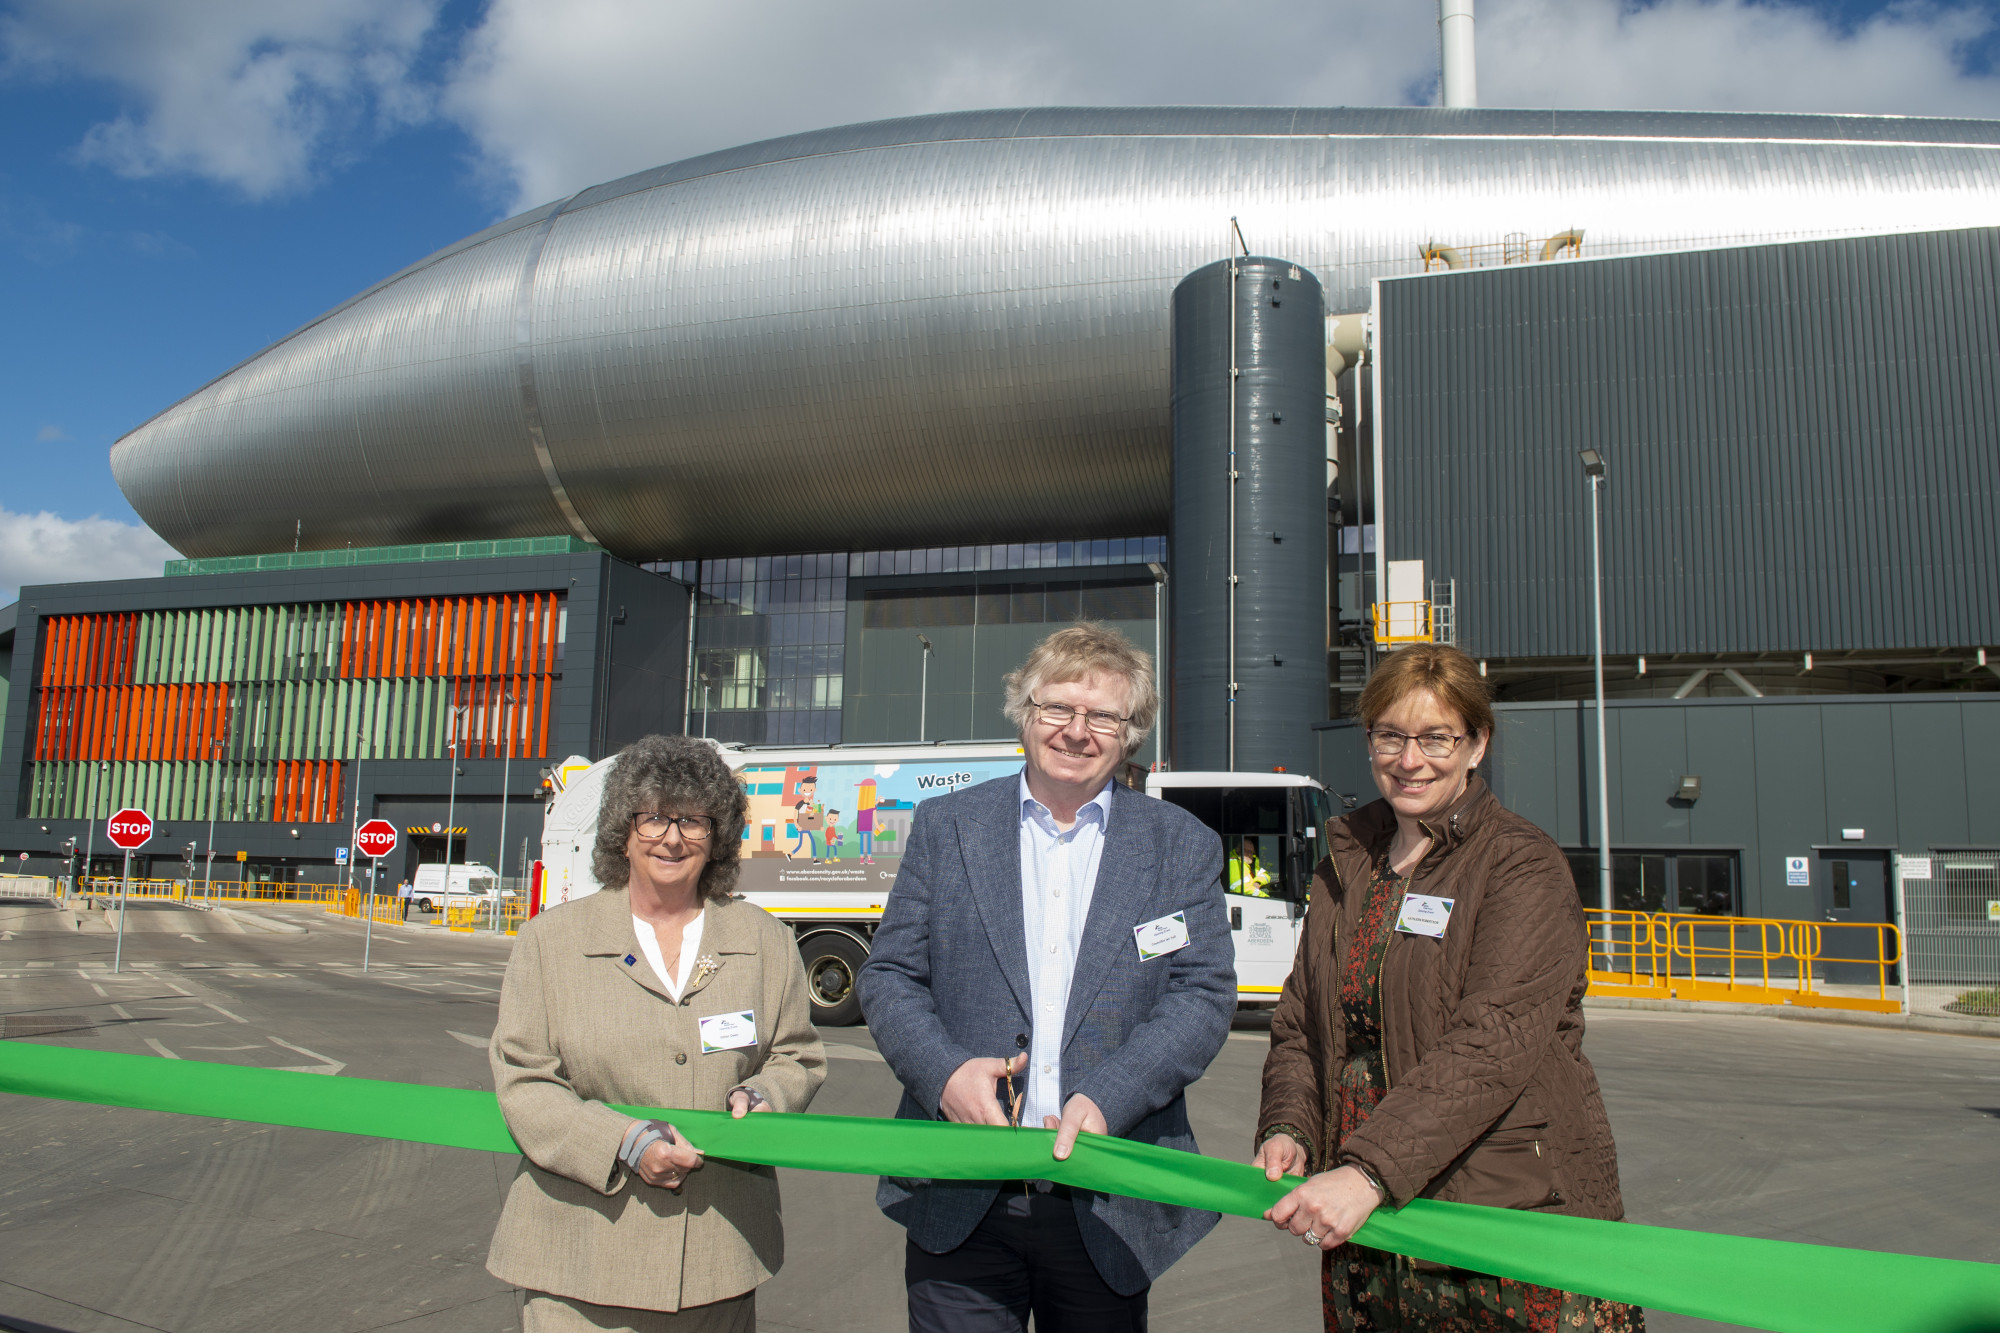 North-east Energy from Waste facility formally opened